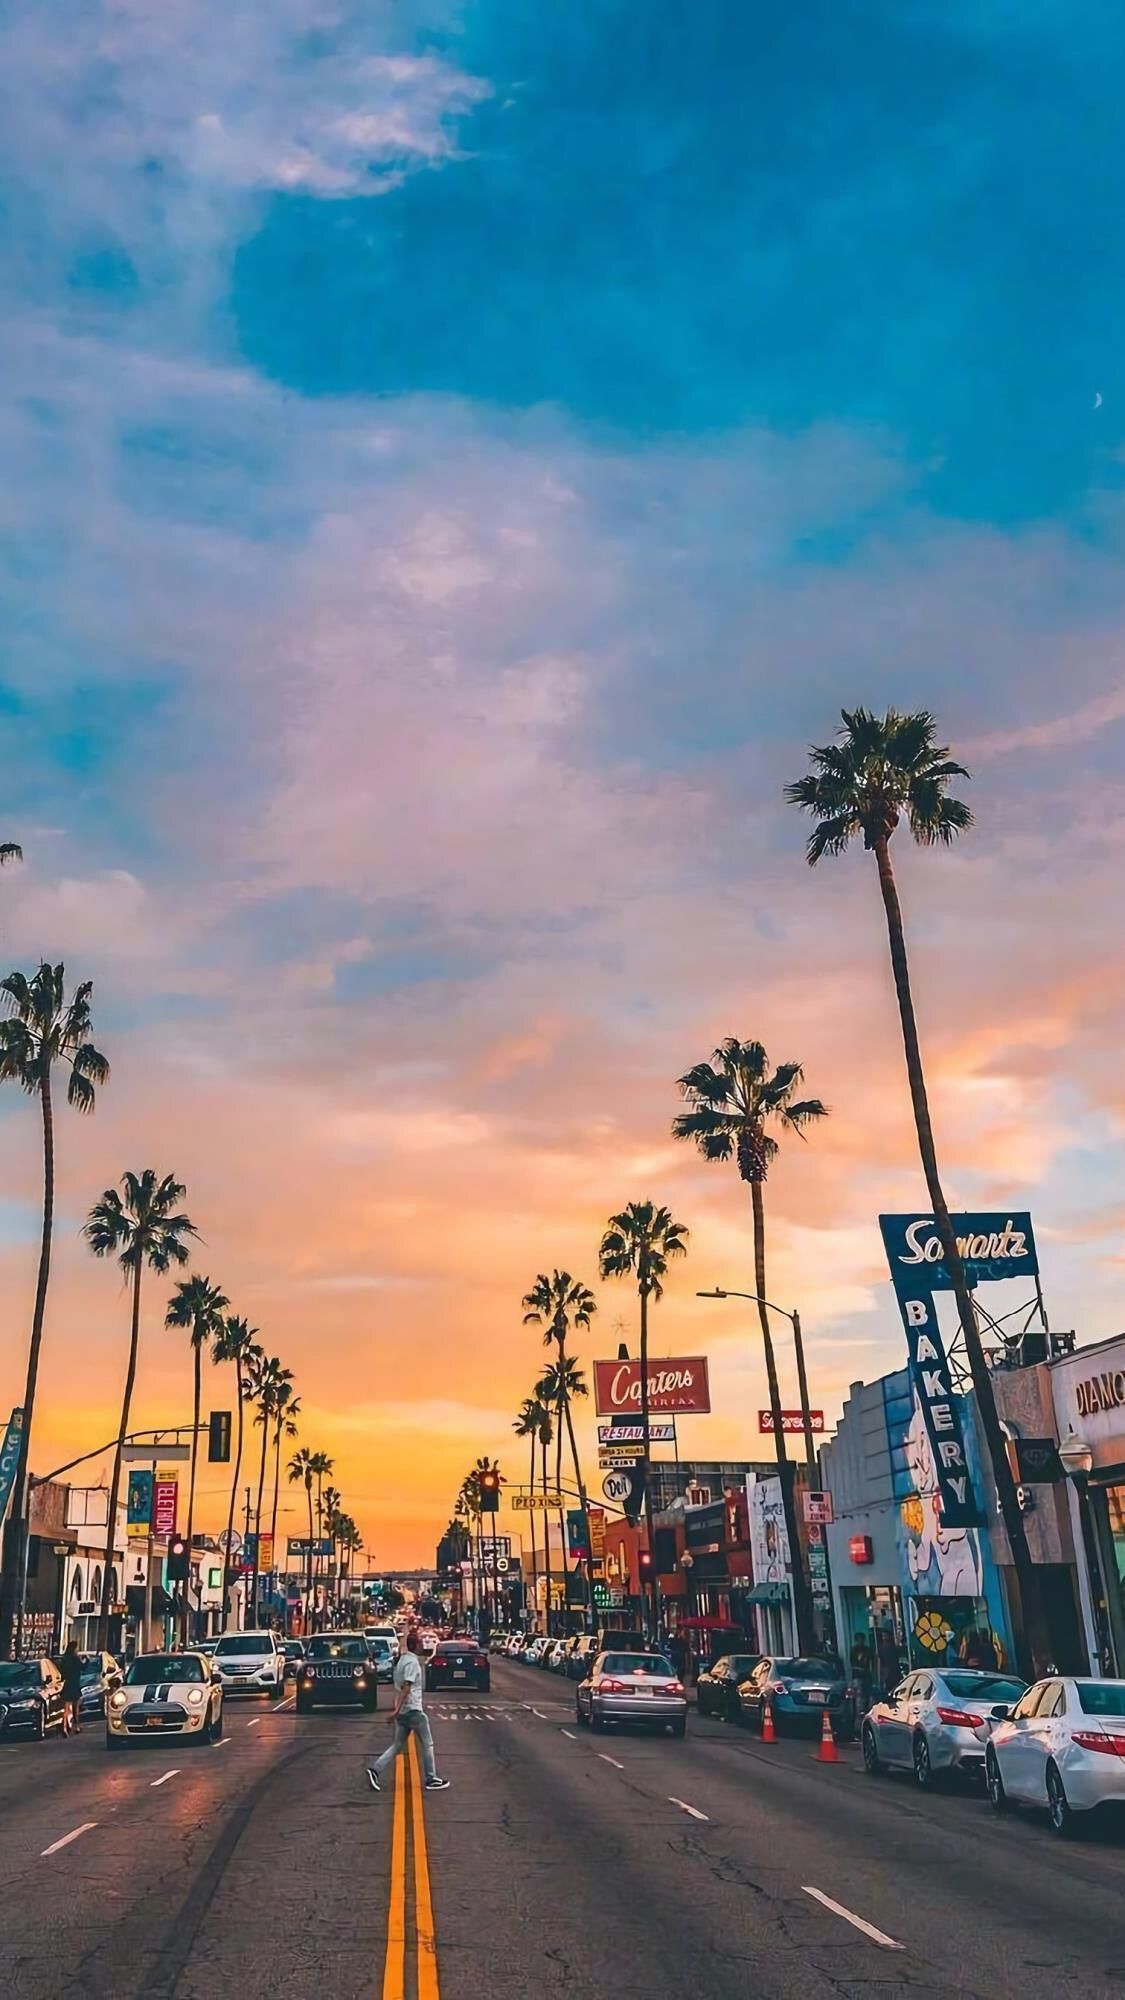 A city street with palm trees and cars - Travel, Los Angeles, road